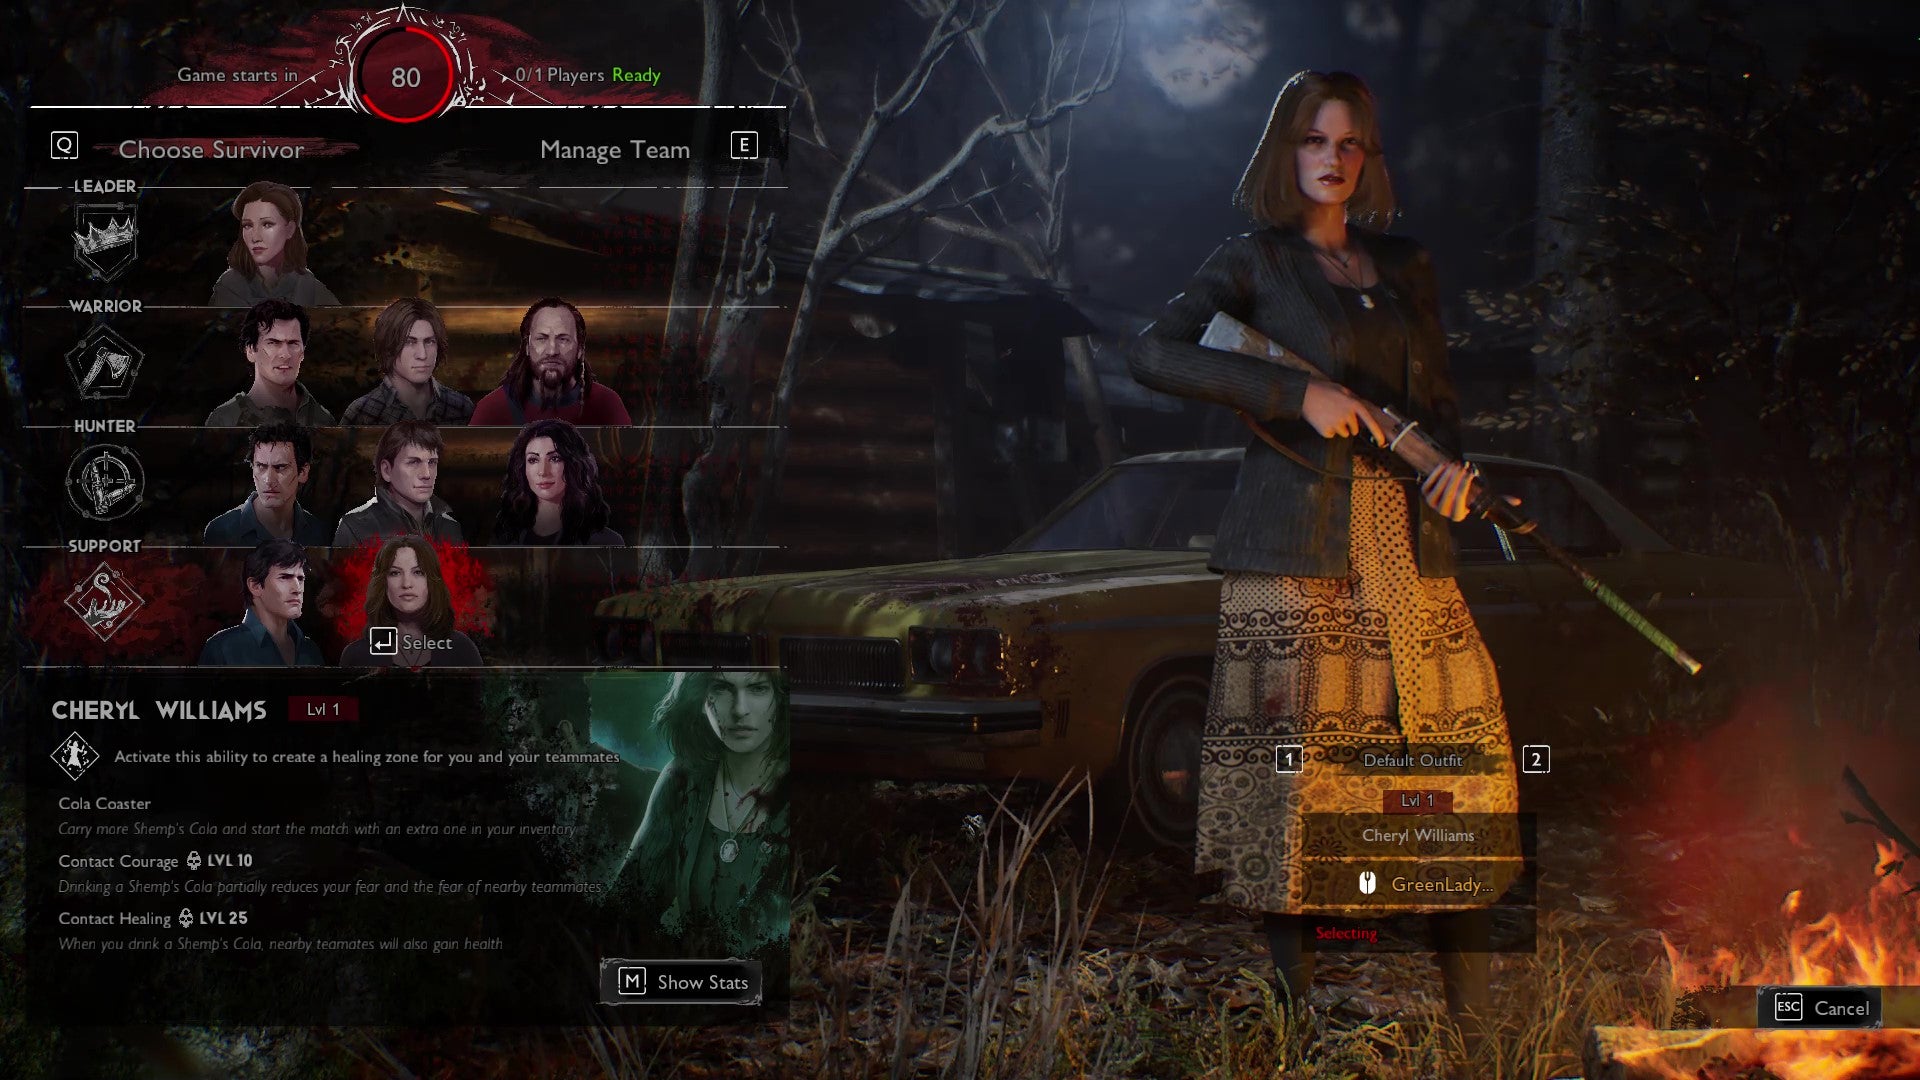 The player selection screen from Evil Dead: The Game, with Cheryl Williams selected by a Survivor player.